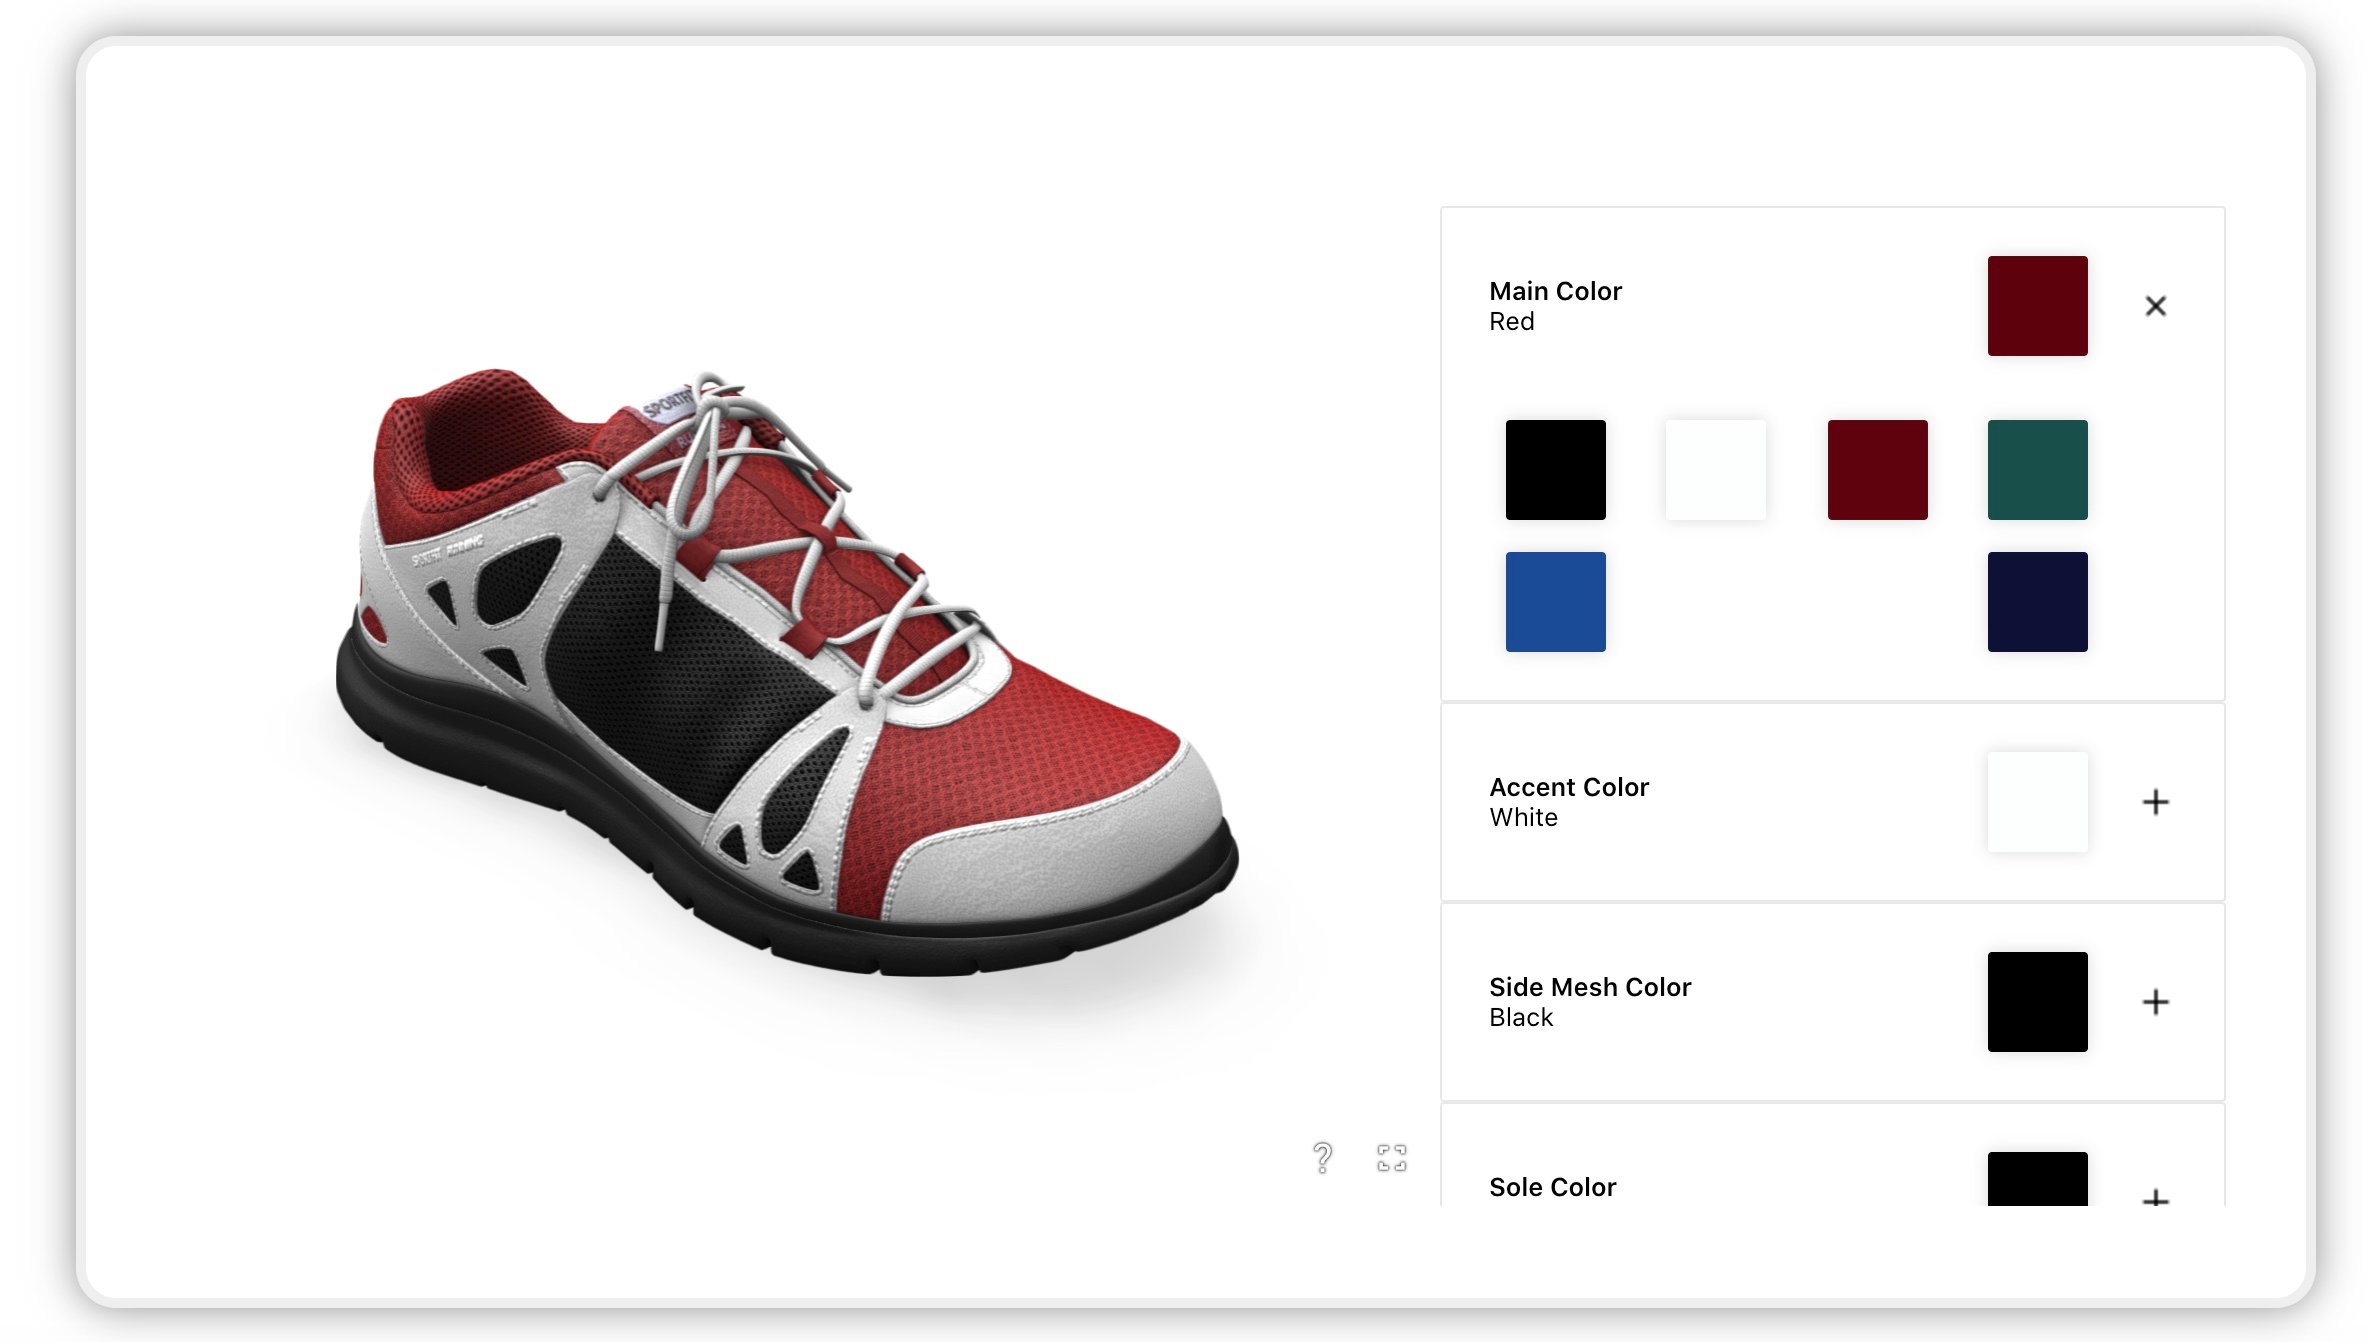 Top 4 Customizable Options Want in an Adidas Configurator